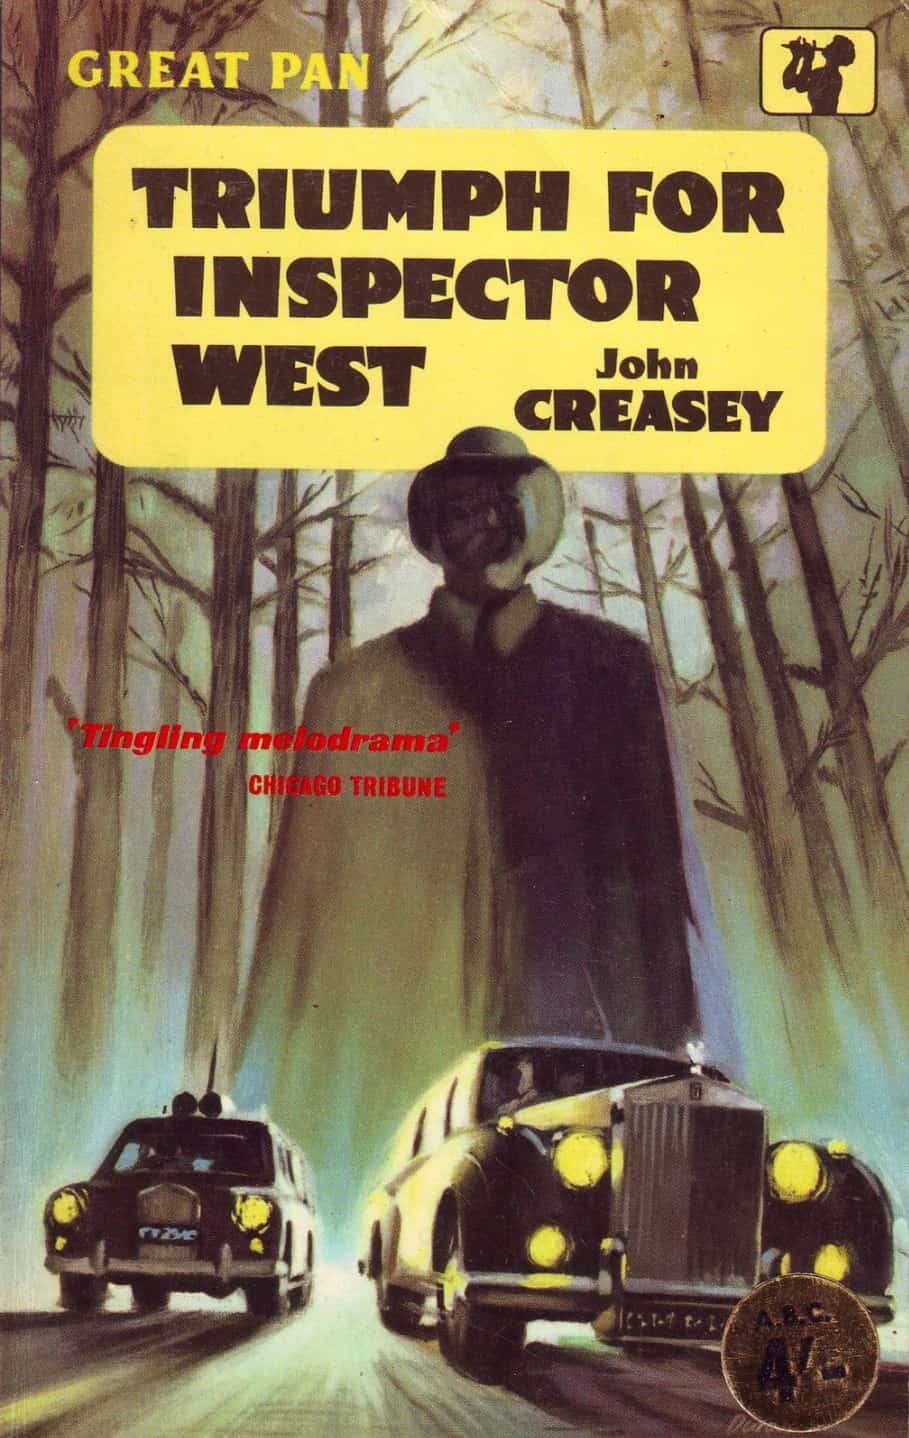 Triumph for Inspector West John Creasey tingling melodrama